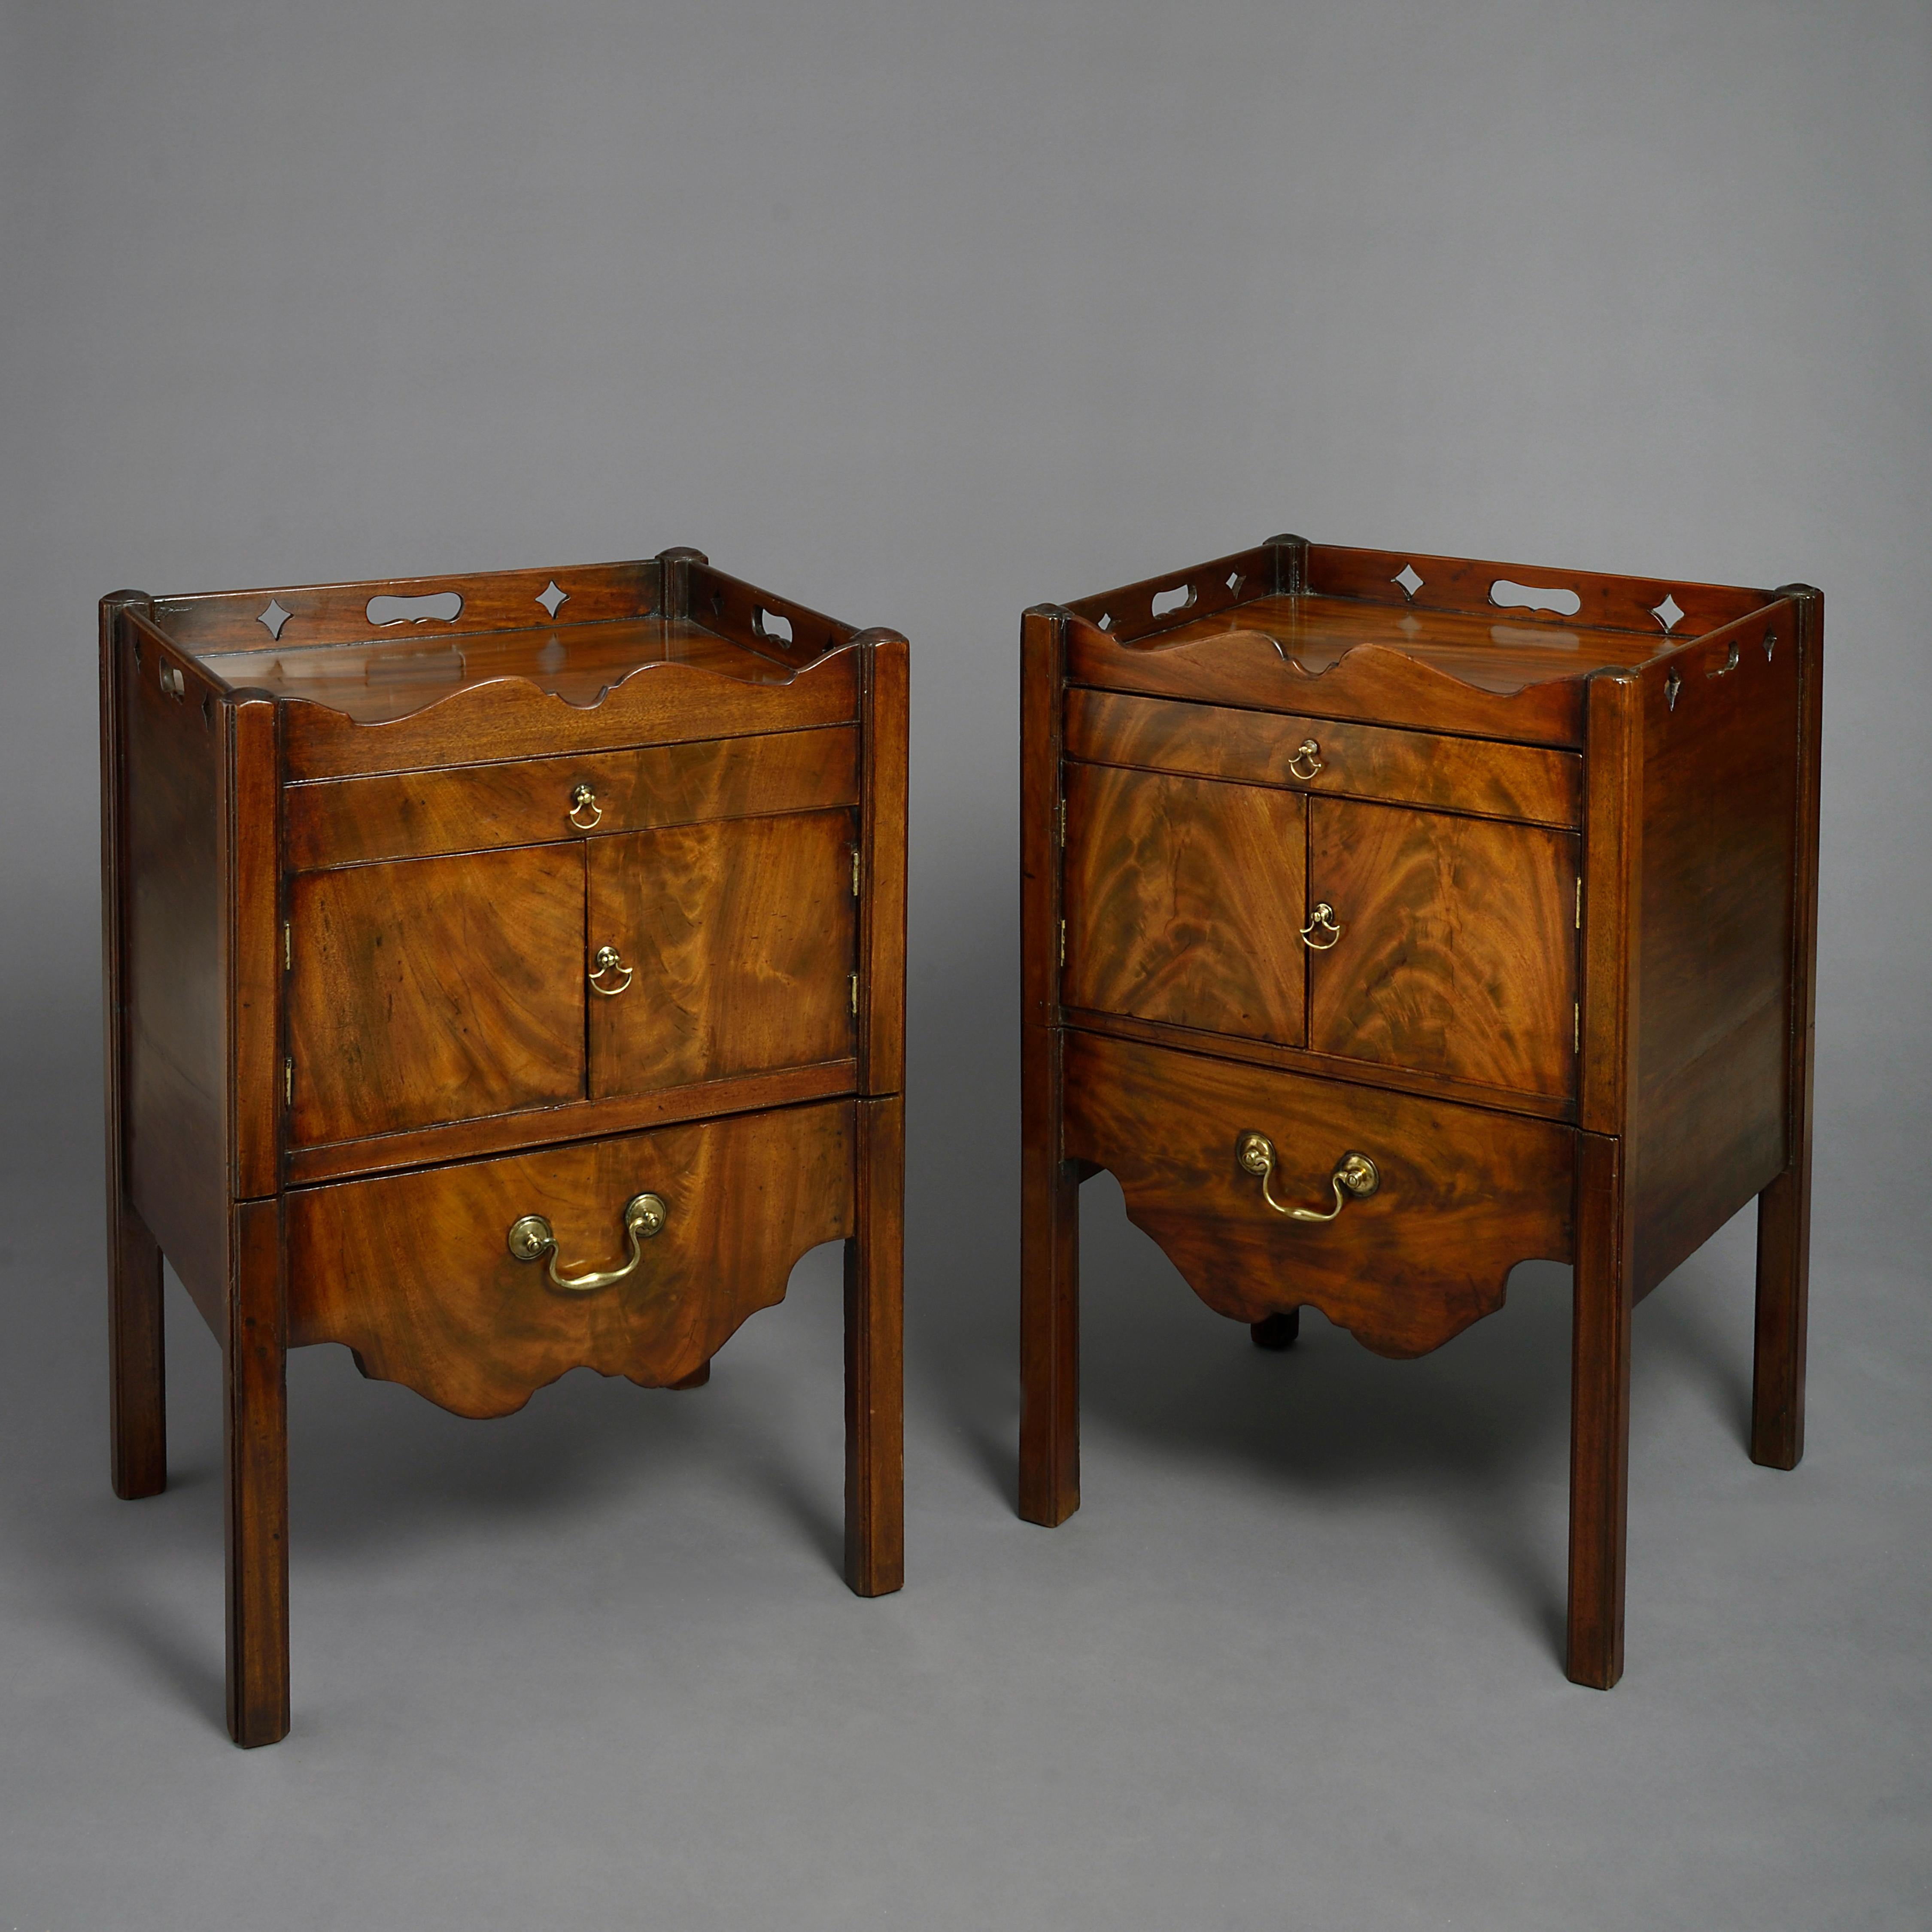 A fine pair of mid-18th century George III Period mahogany bedside cupboards of good color and figuring, each supporting a galleried top with pierced carrying handles above a drawer, two cupboard doors and a lower slide with shaped apron, suede